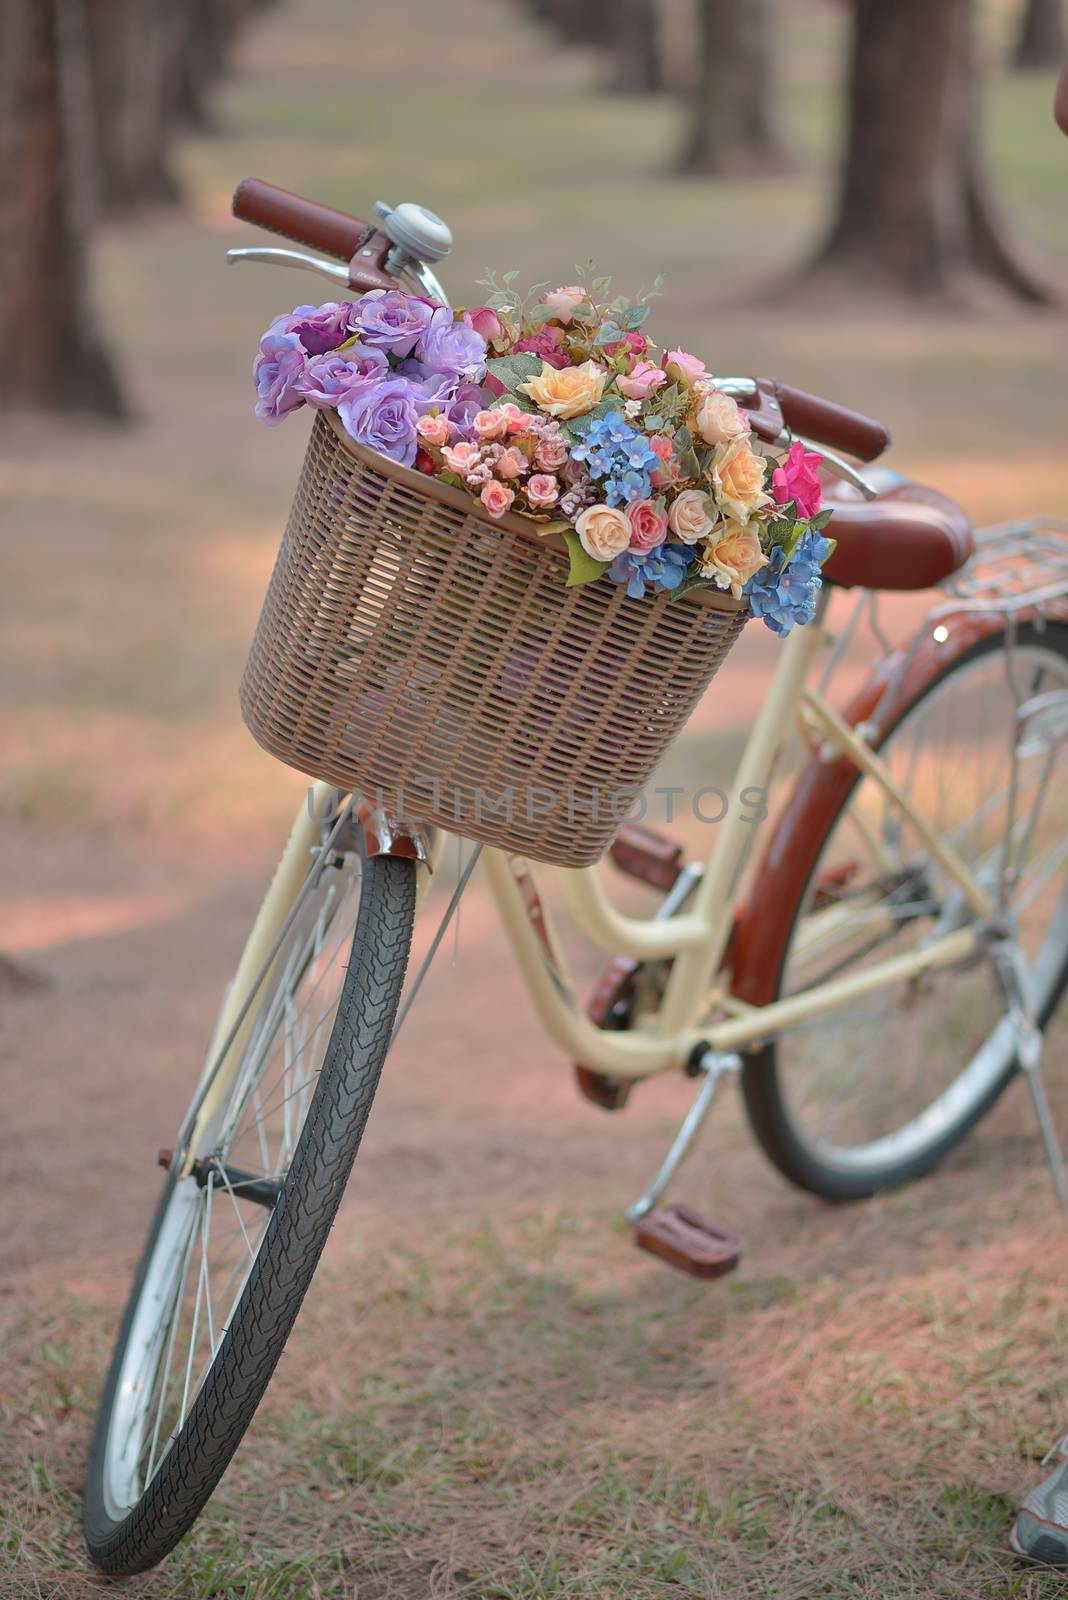 Soft focus flower on a bicycle by sommai